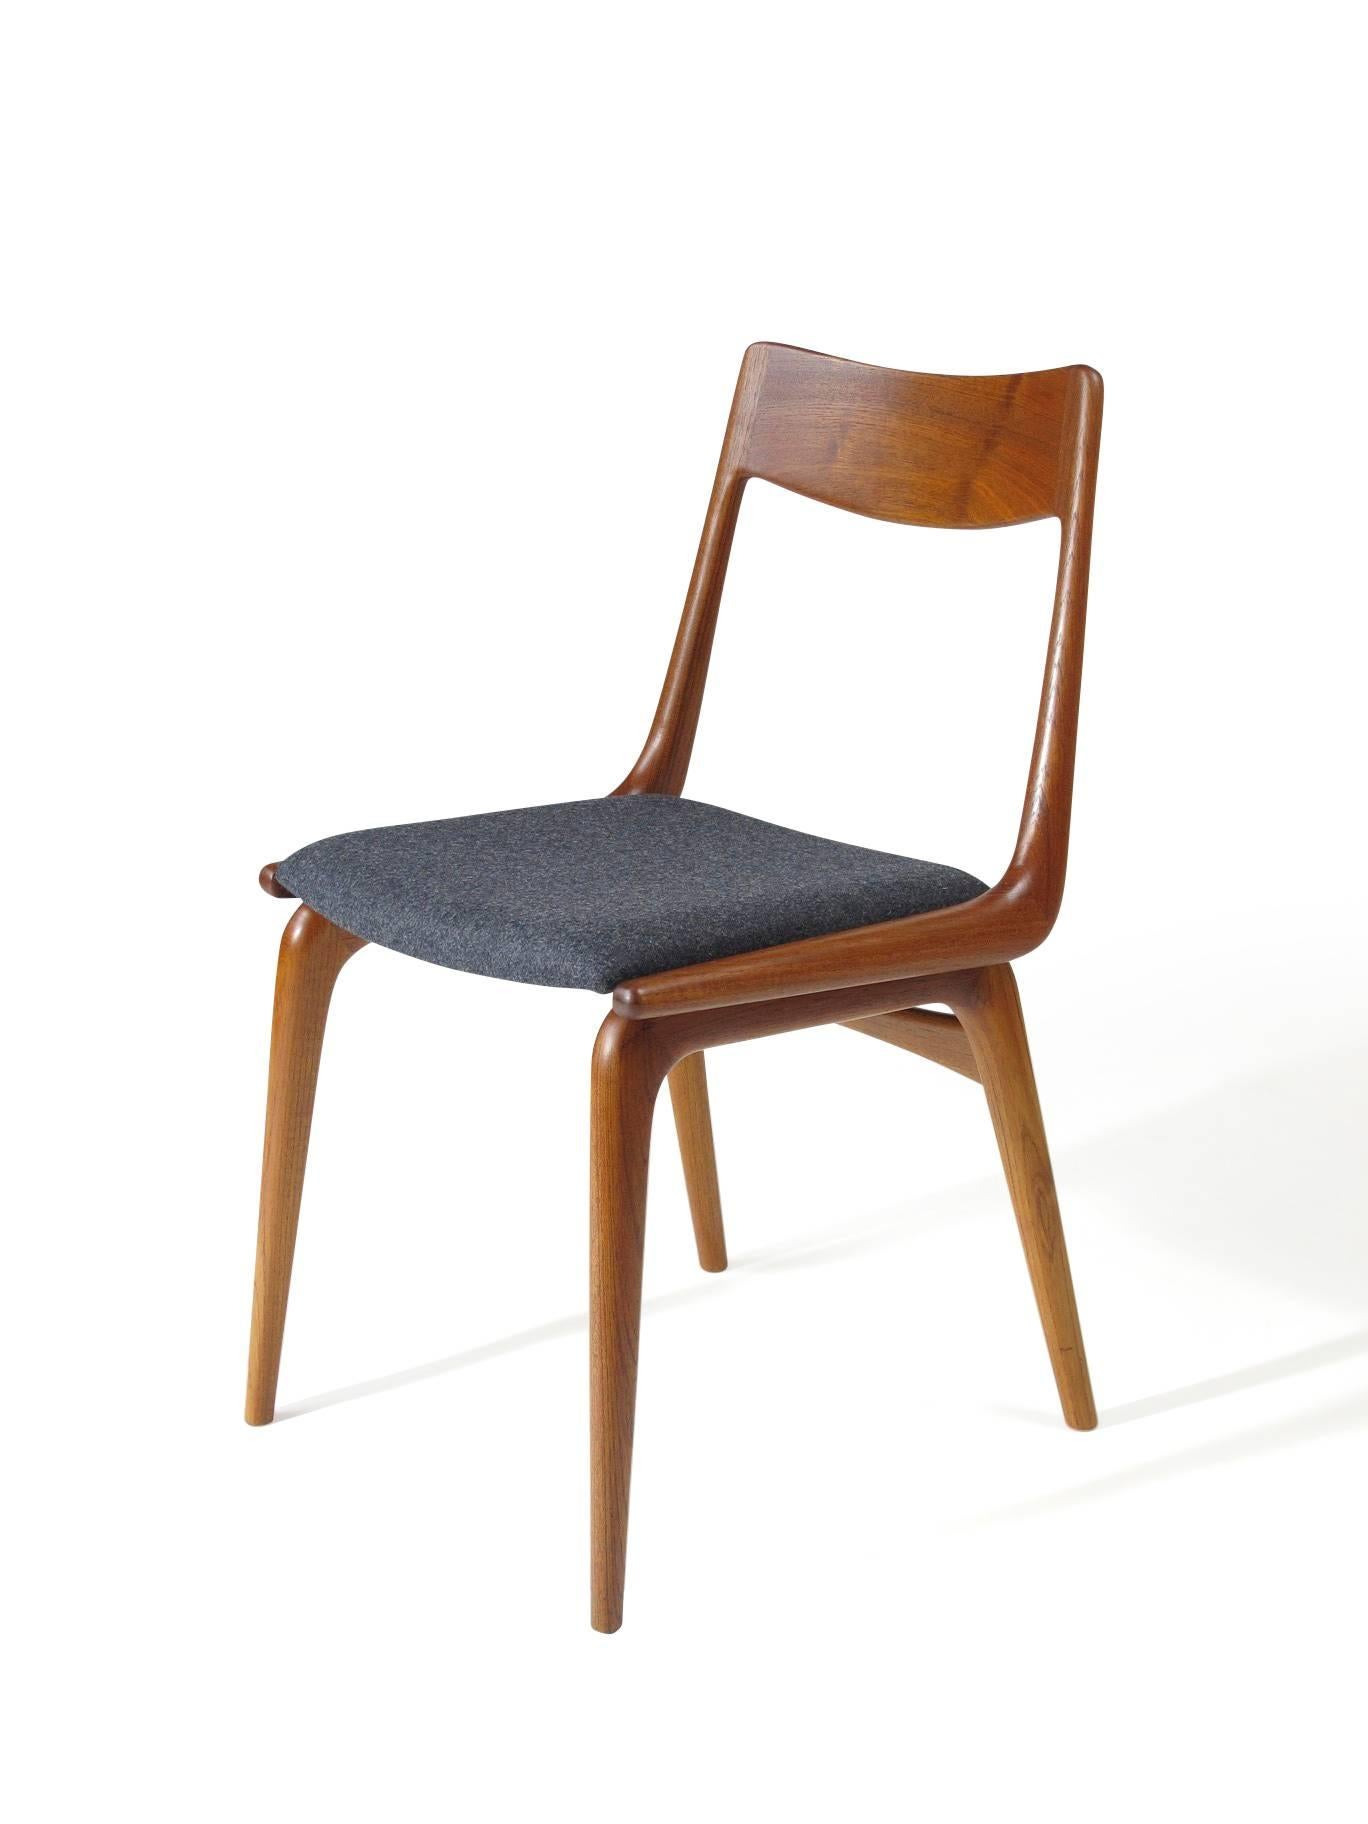 Mid-Century dining chairs designed Erik Christiansen for Slagelse. Solid teak frames in boomerang form with finger joinery and newly upholstered seats in grey wool. Chairs are fully restored and in a excellent condition.

